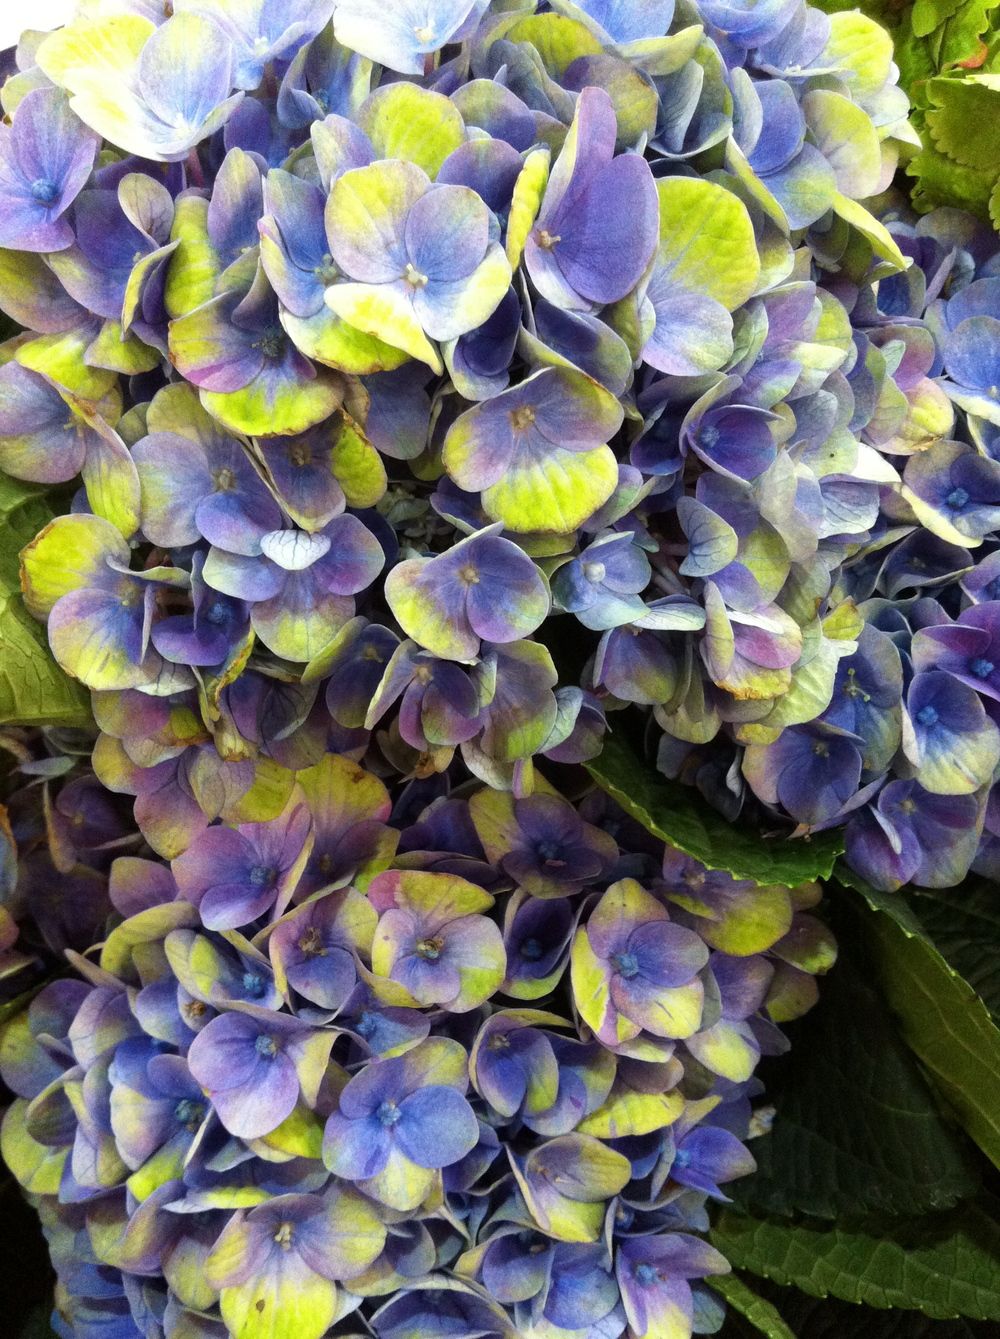 images/plants/hydrangea/hyd-magical-everlasting-amethyst/hyd-magical-everlasting-amethyst-0024.jpg